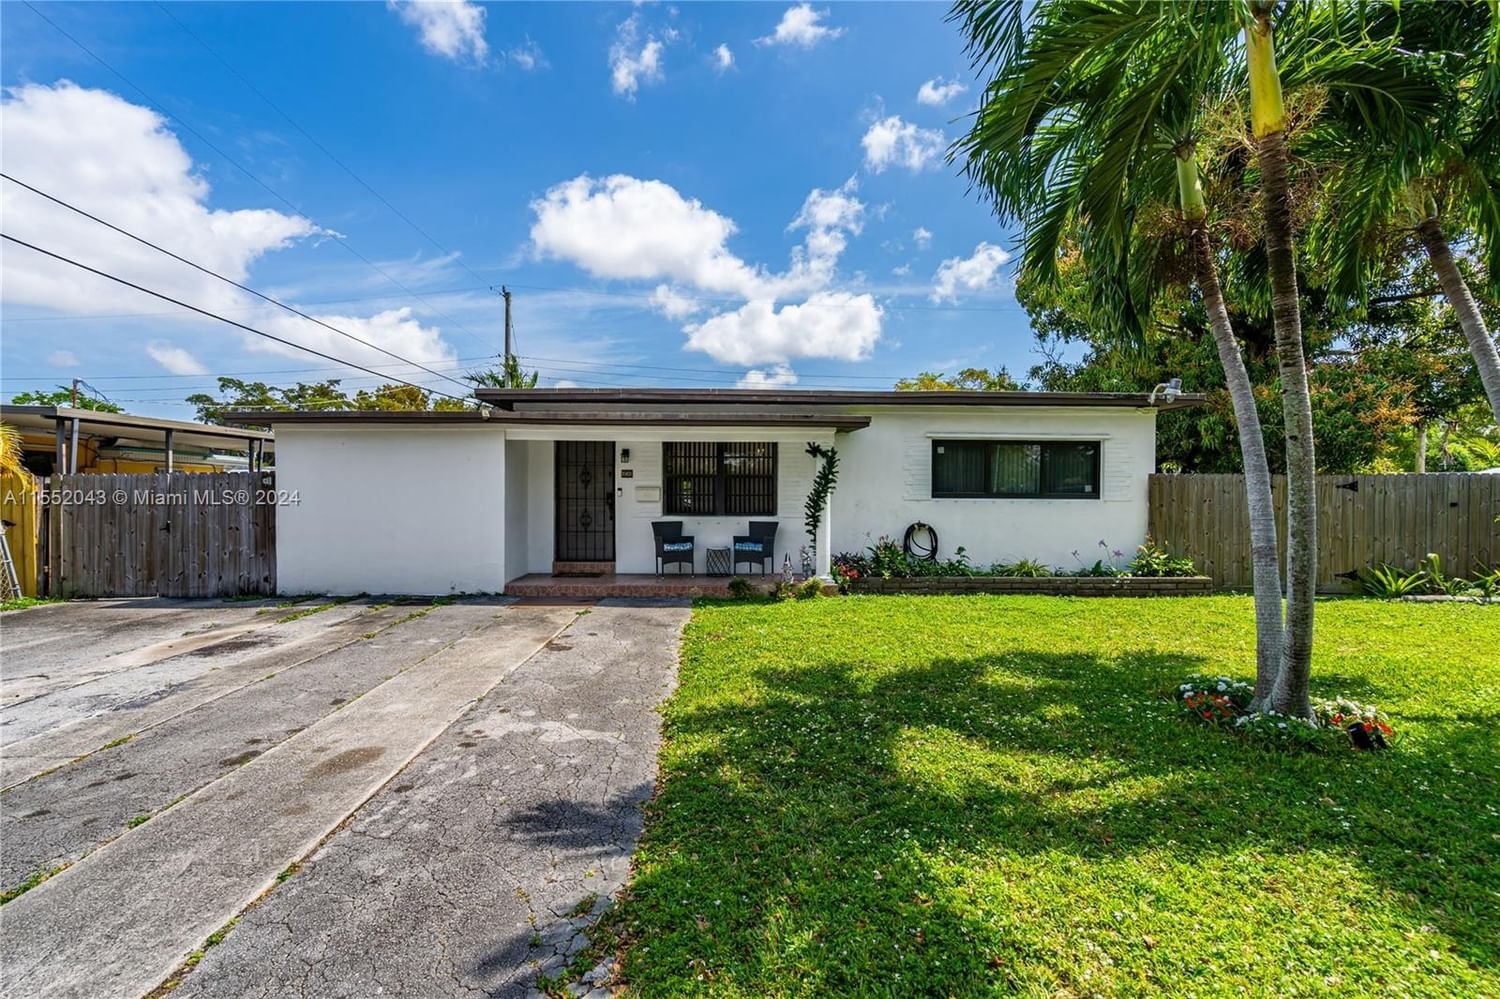 Real estate property located at 1901 63rd Ct, Miami-Dade County, CAMNER MANOR 2ND ADDN, West Miami, FL